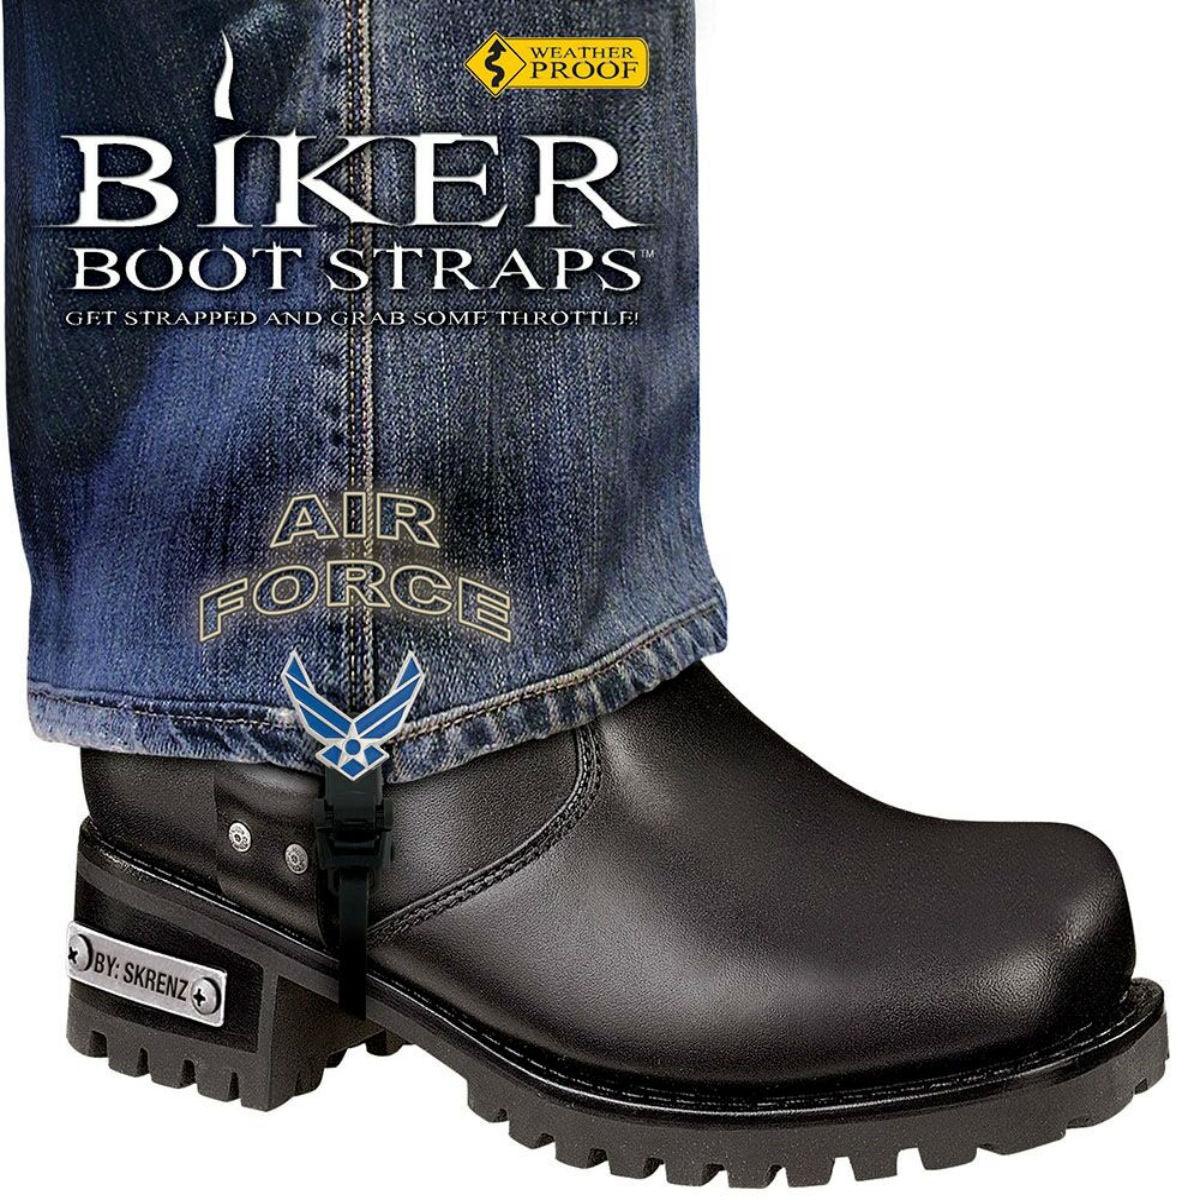 Daniel Smart Weather Proof Boot Straps, Air Force, 6 Inch - American Legend Rider